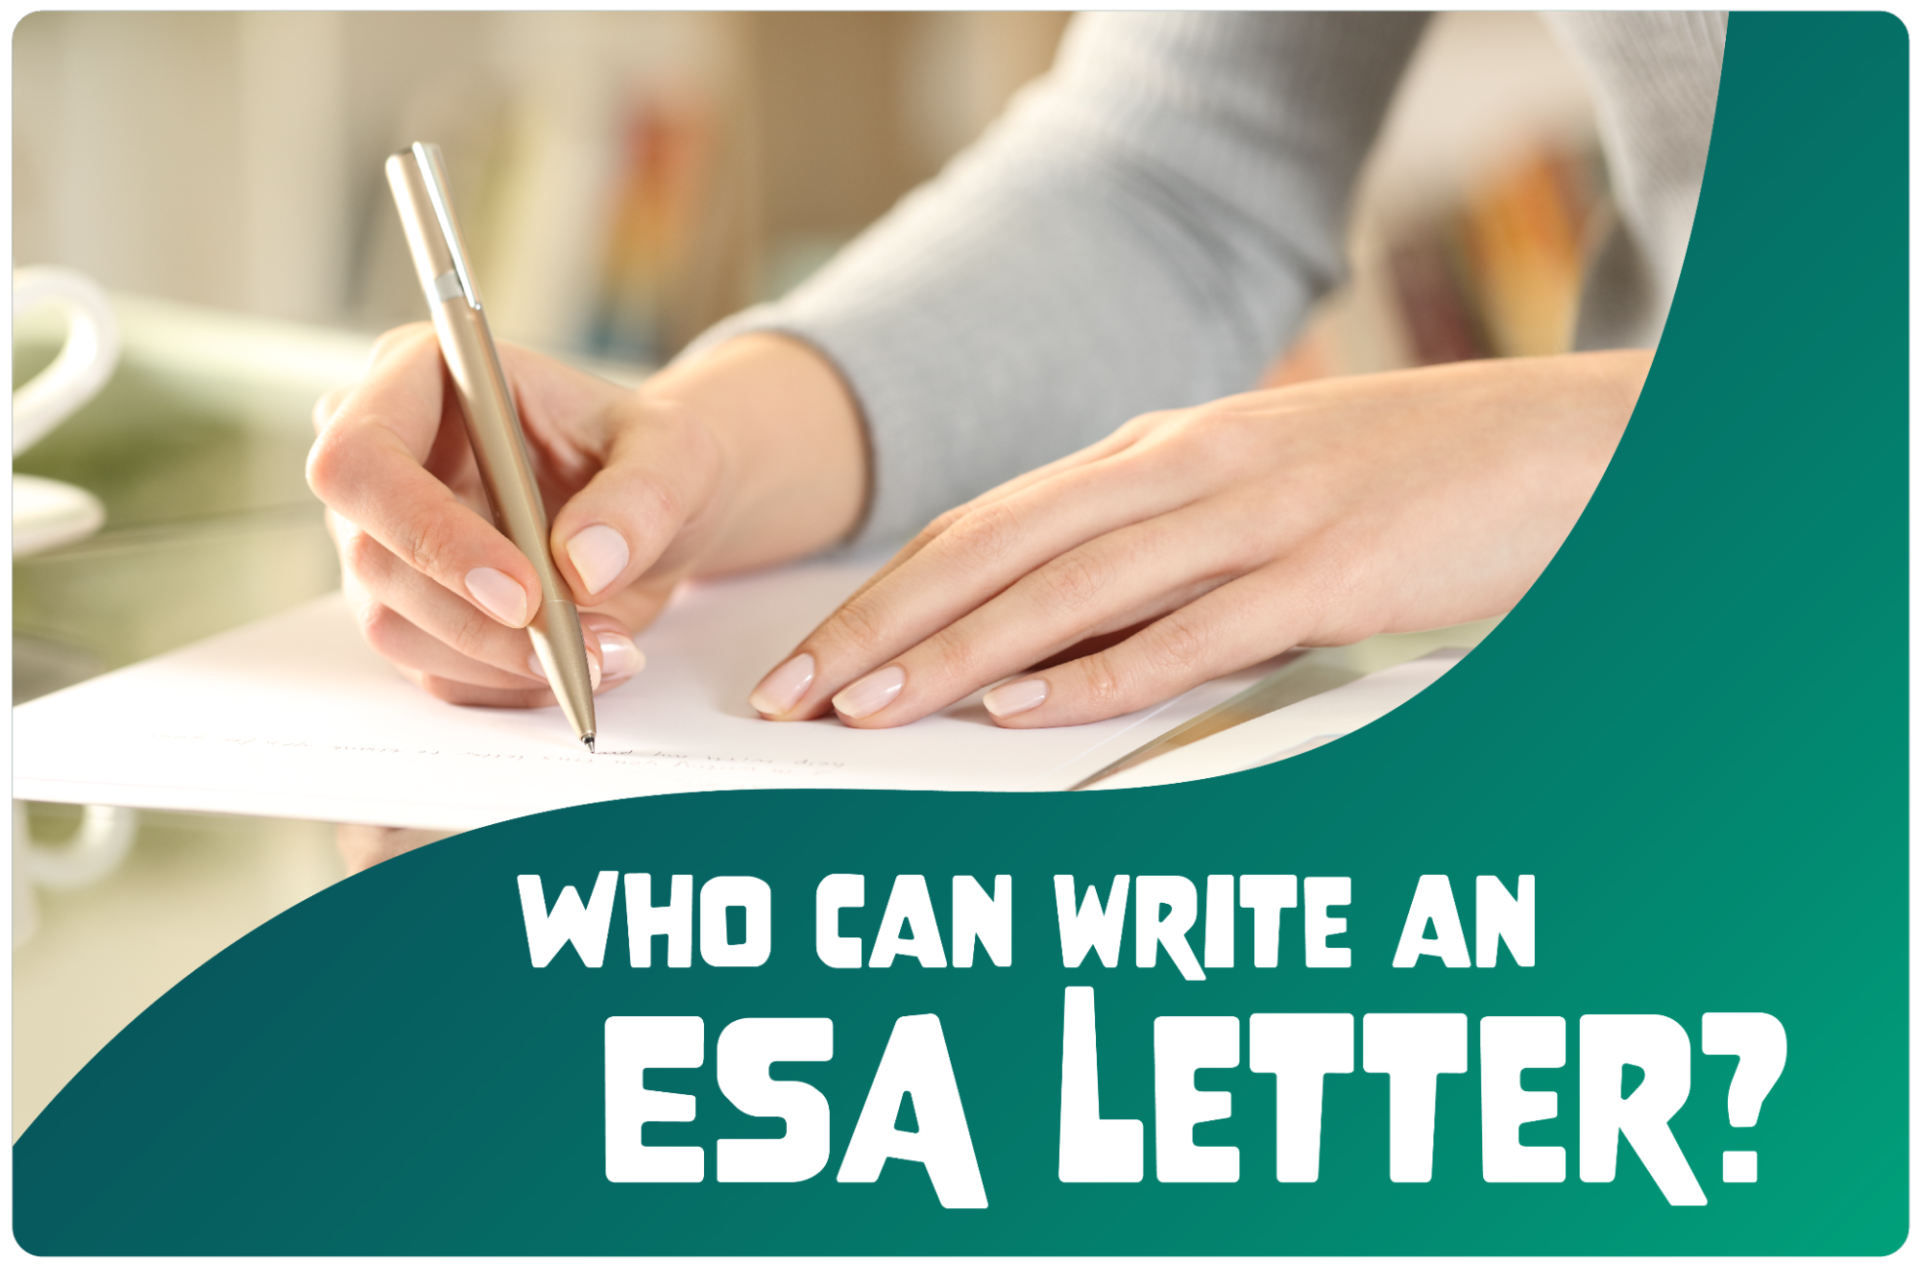 Who Can Write an Emotional Support Letter